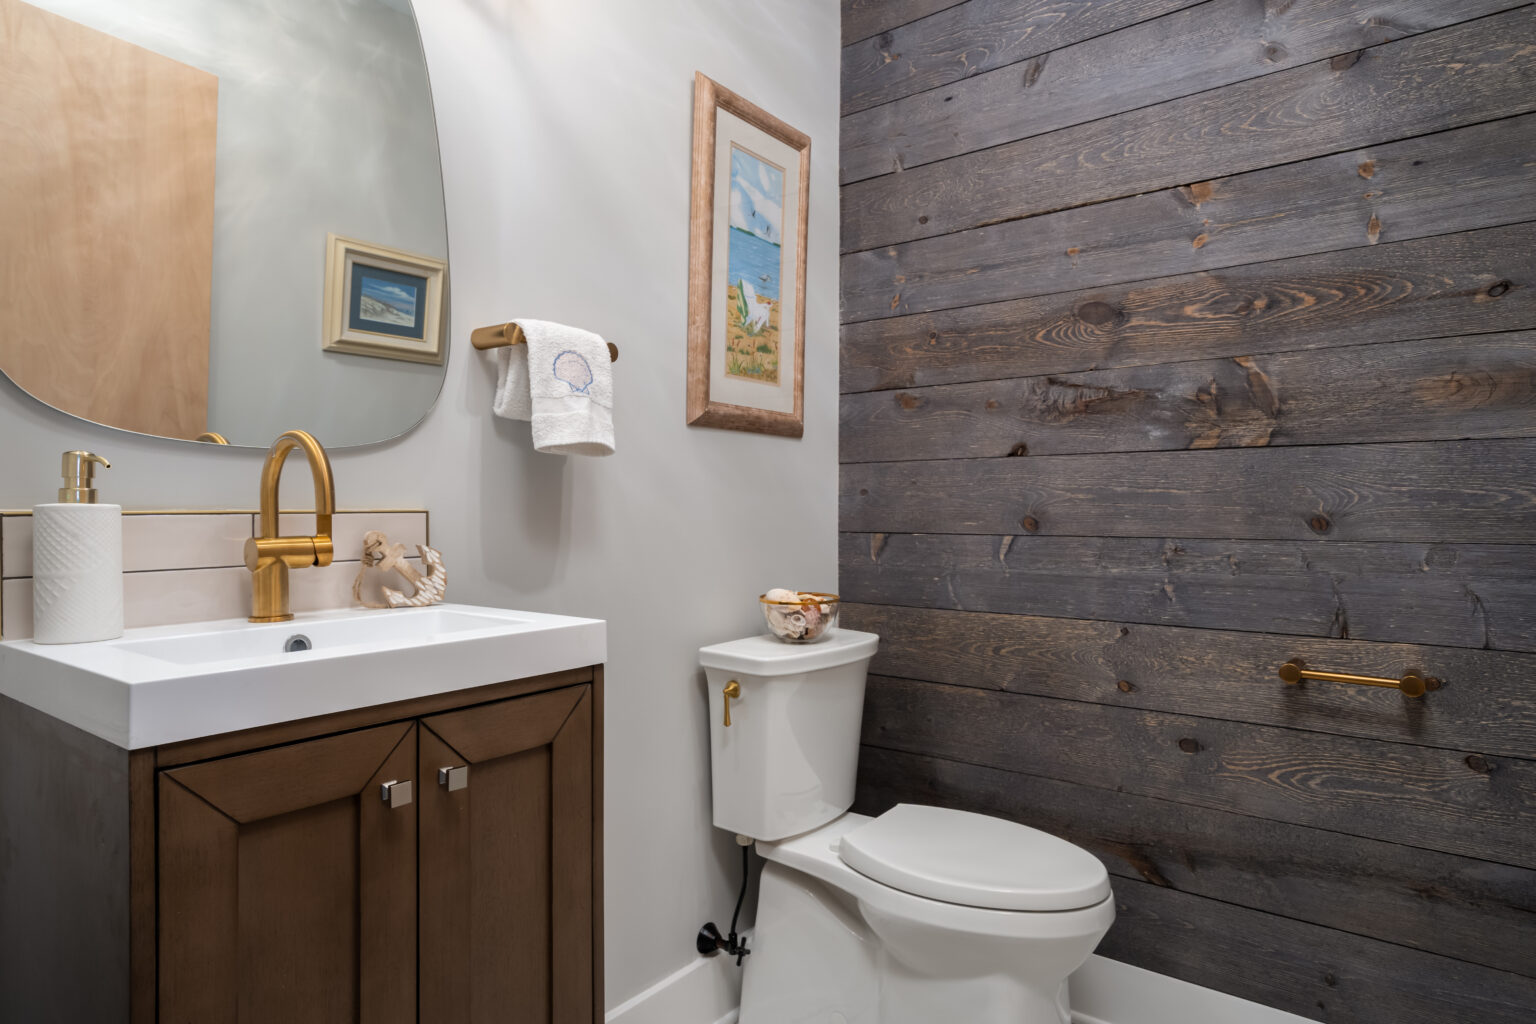 Bathroom with a wood wall and gold accents from amiano and son construction